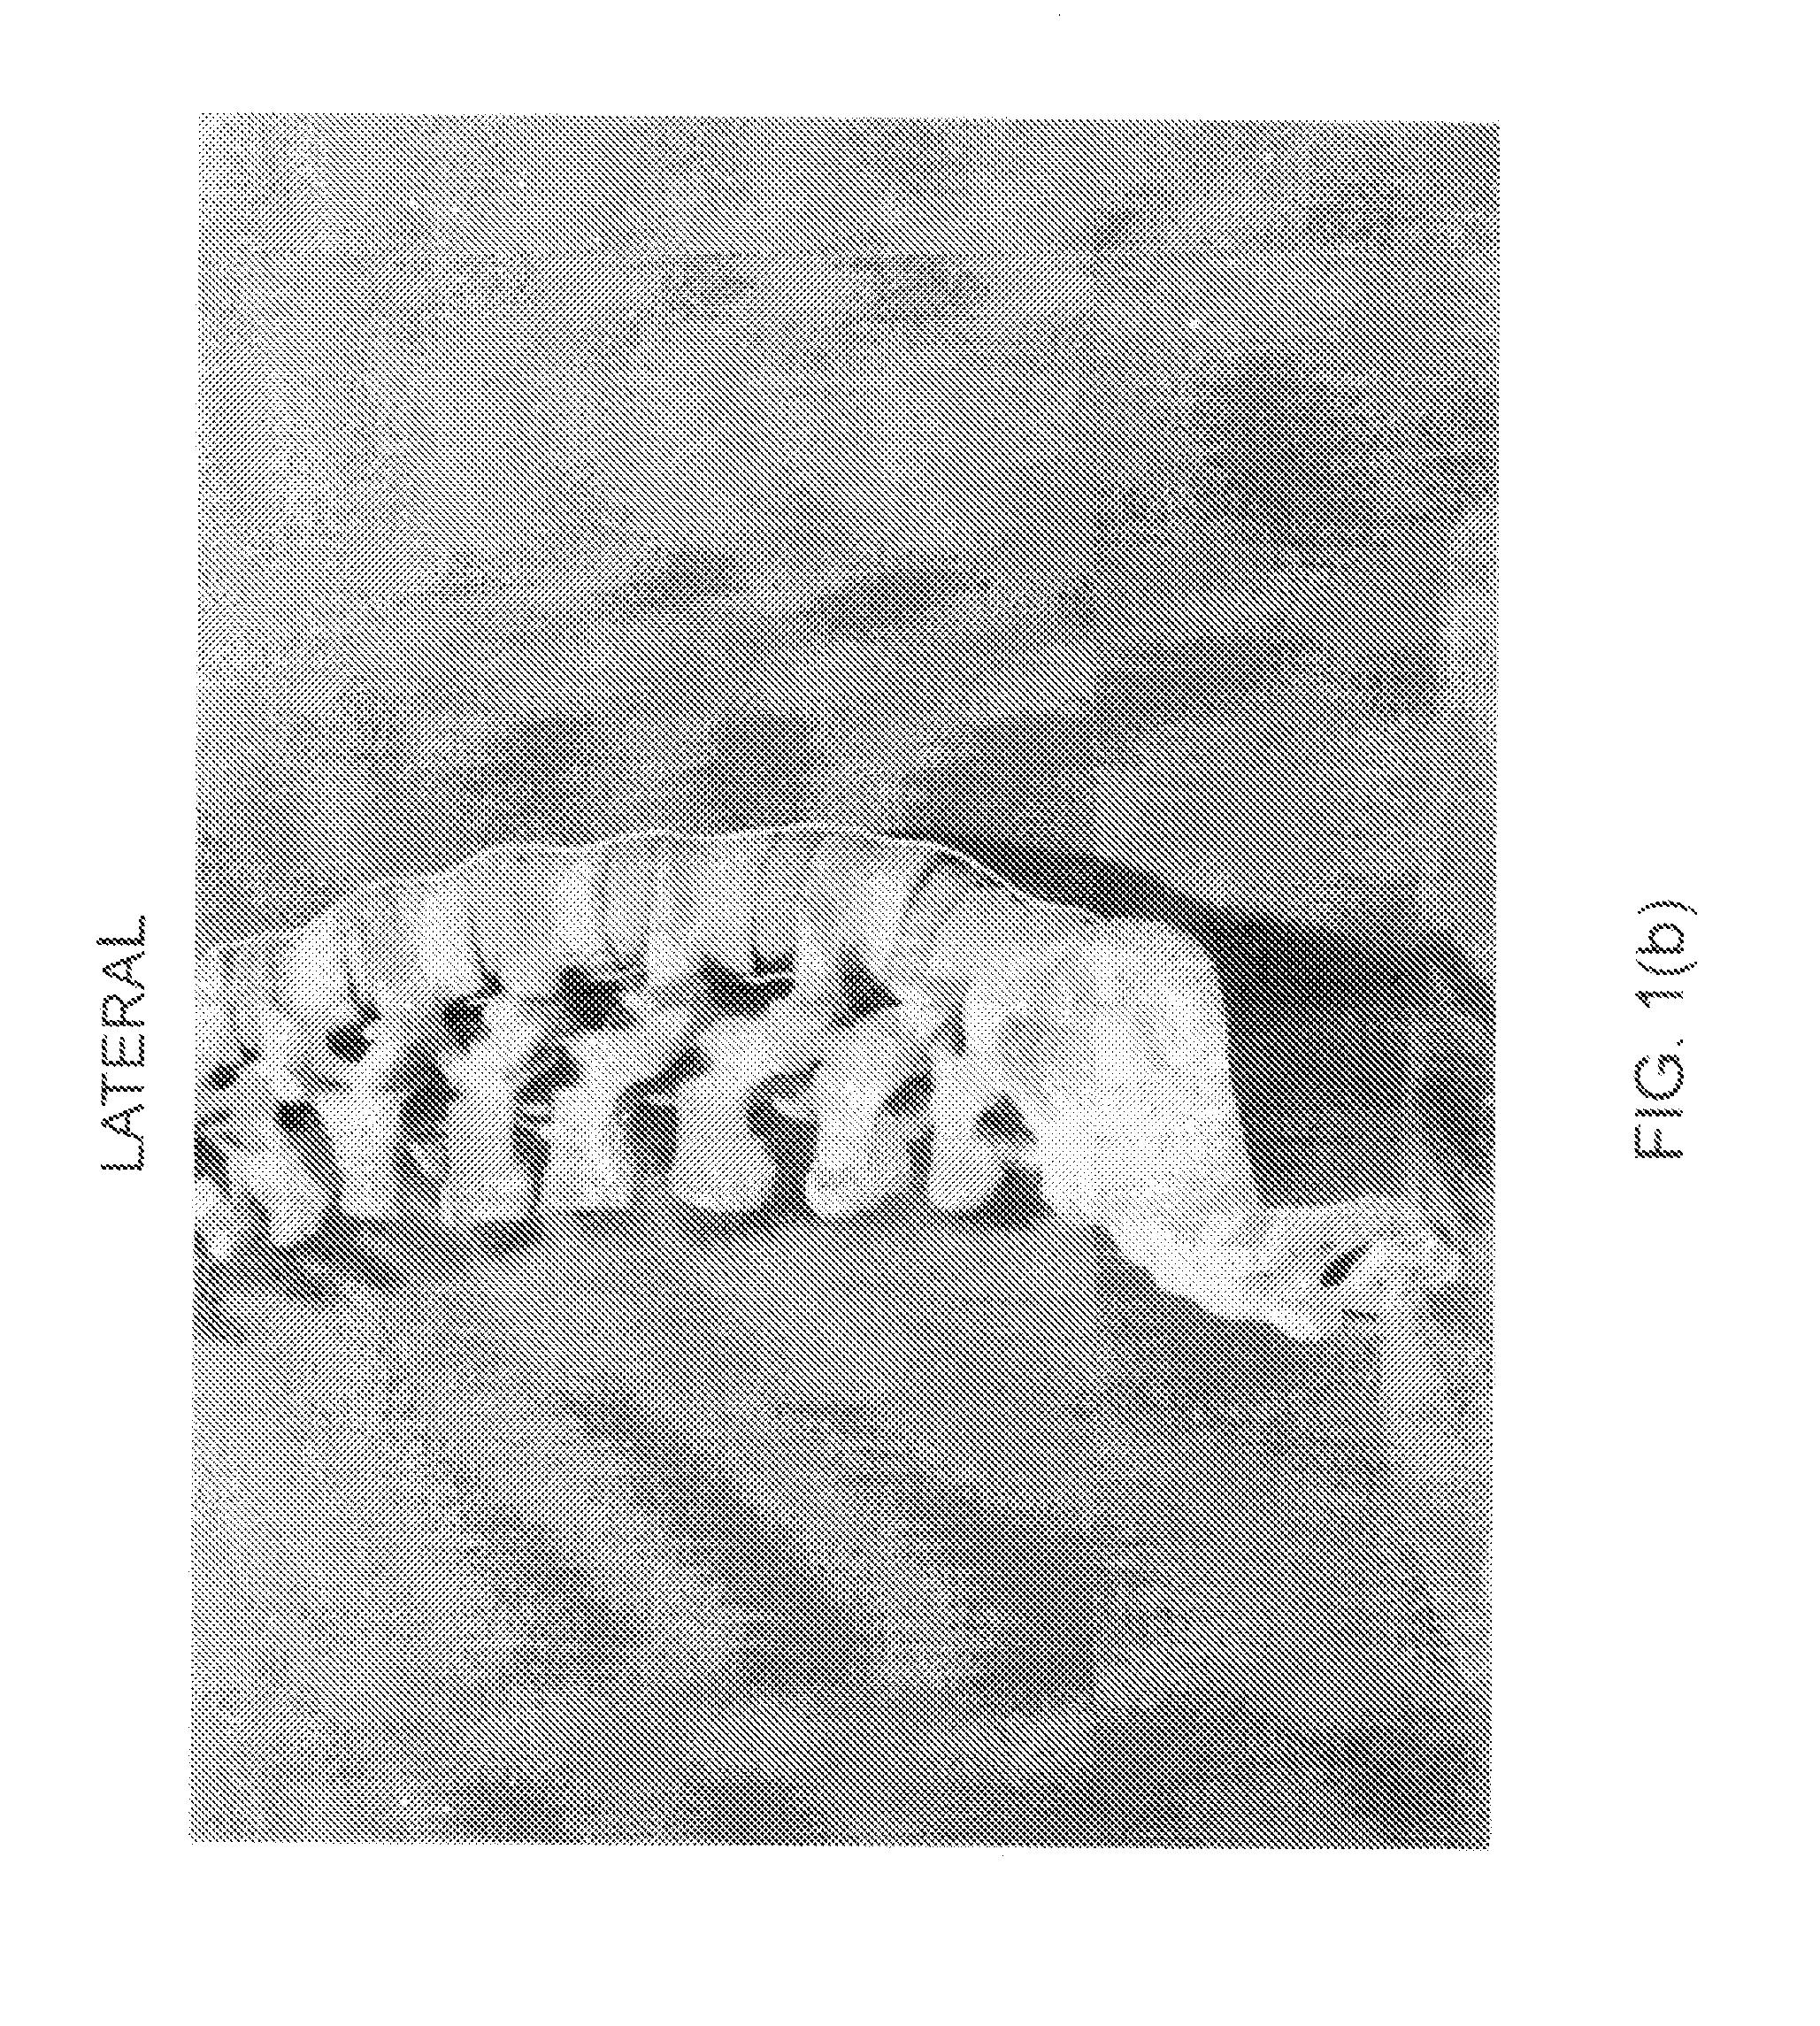 System for determining and placing spinal implants or prostheses